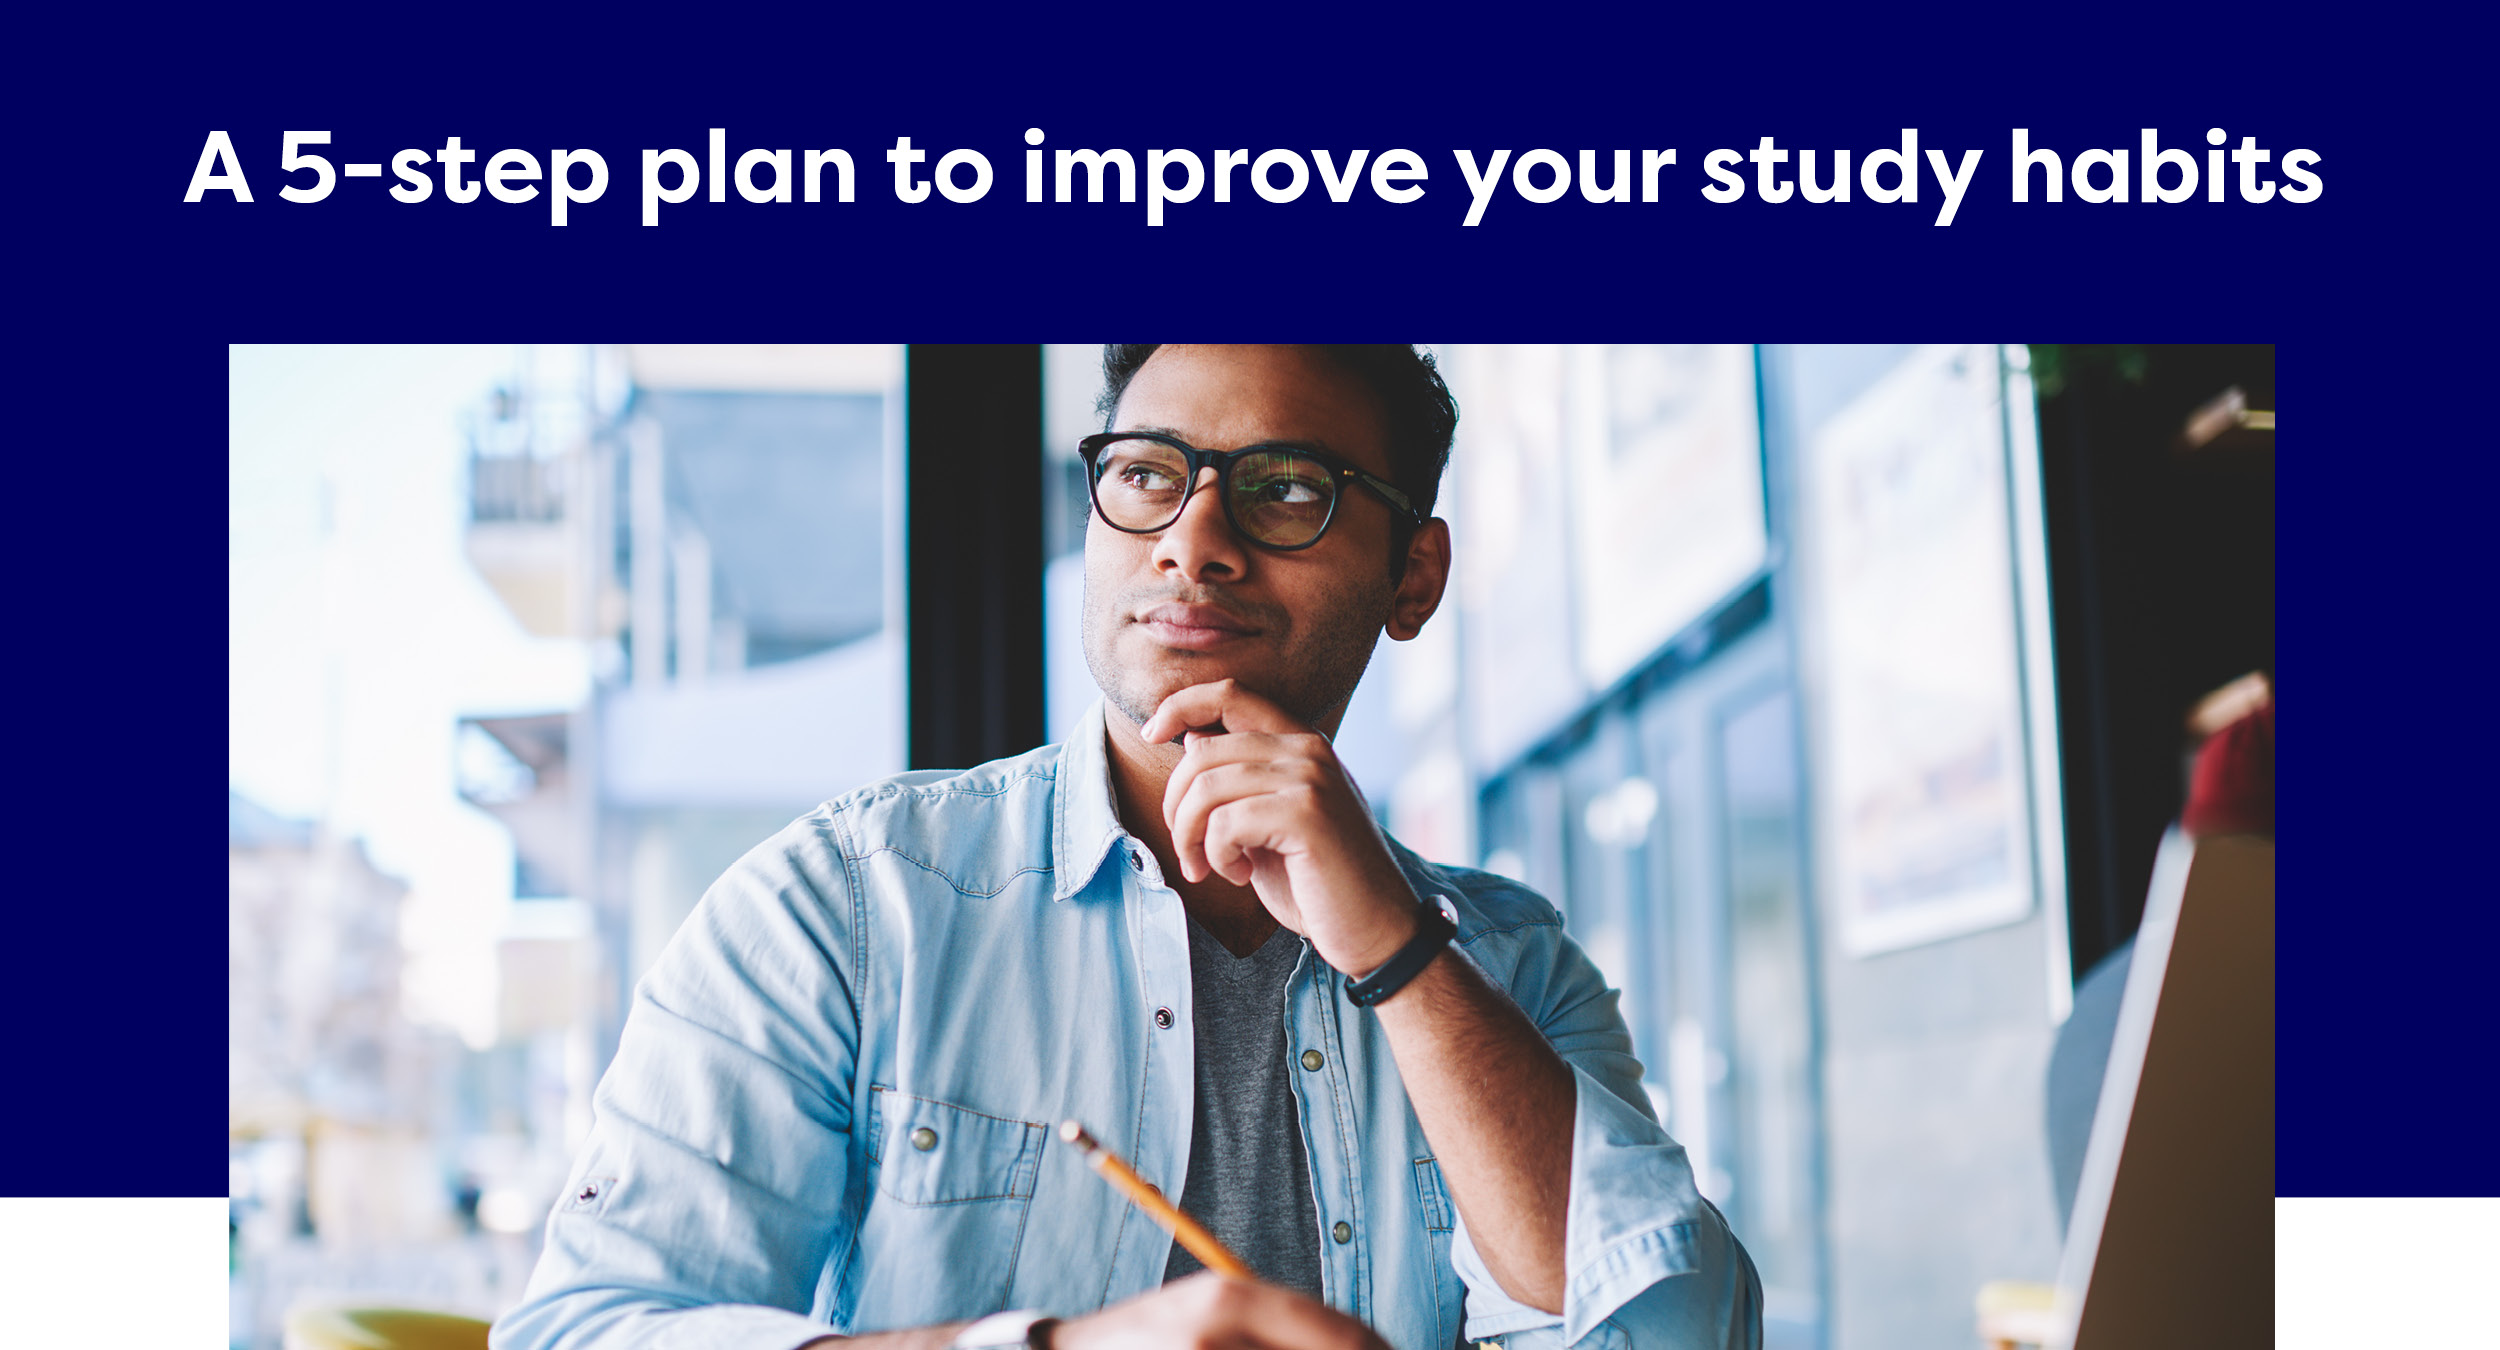 A 5-step plan to improve your study habits